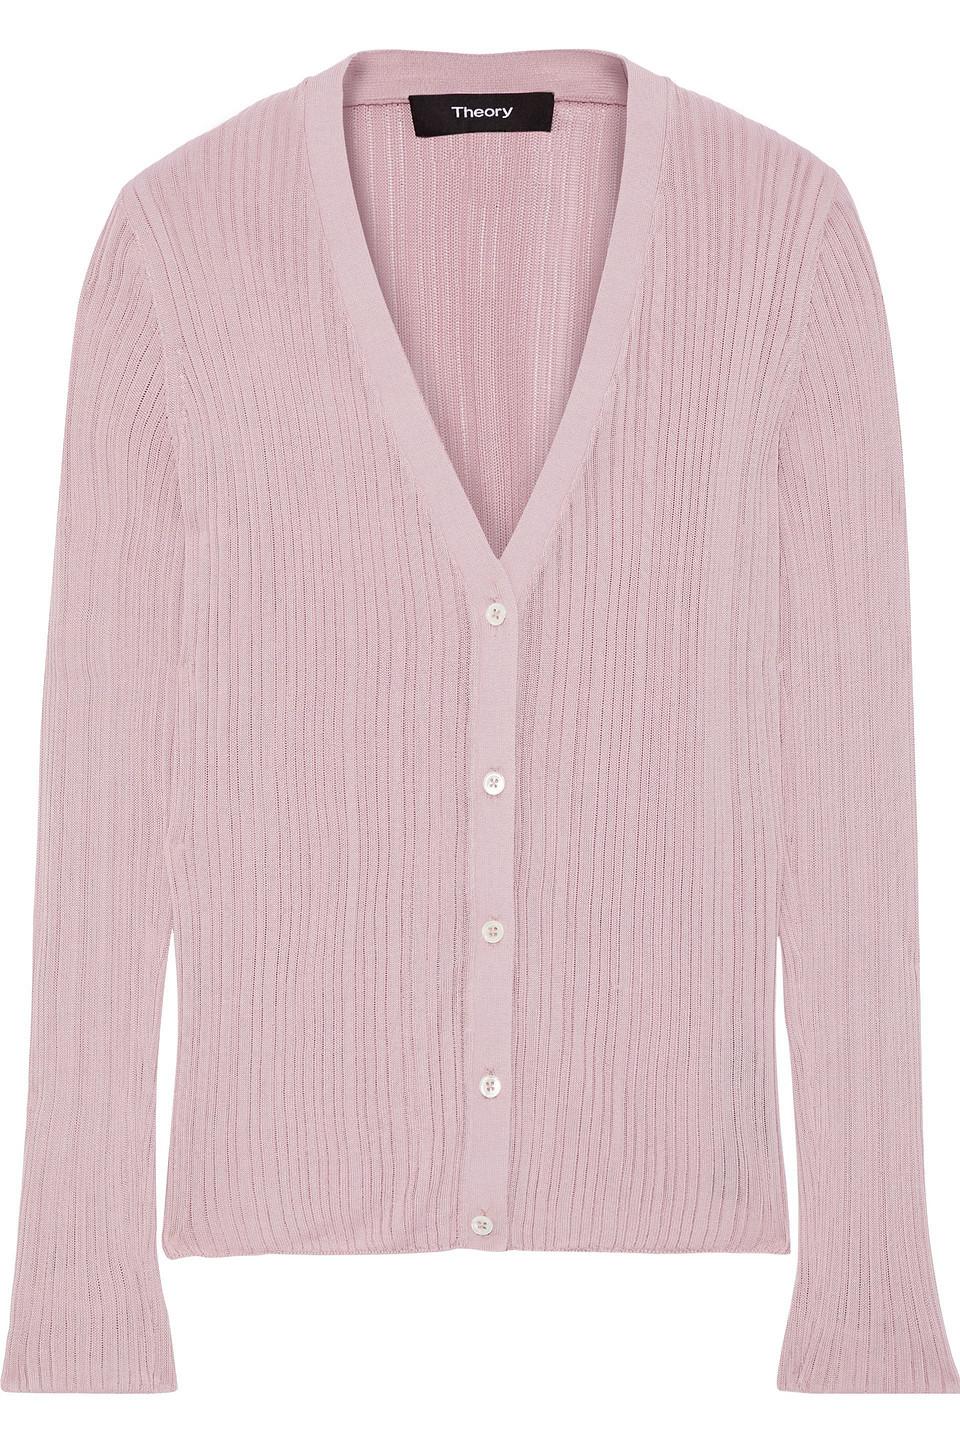 Theory Pointelle-knit Cardigan Lilac in Purple - Lyst